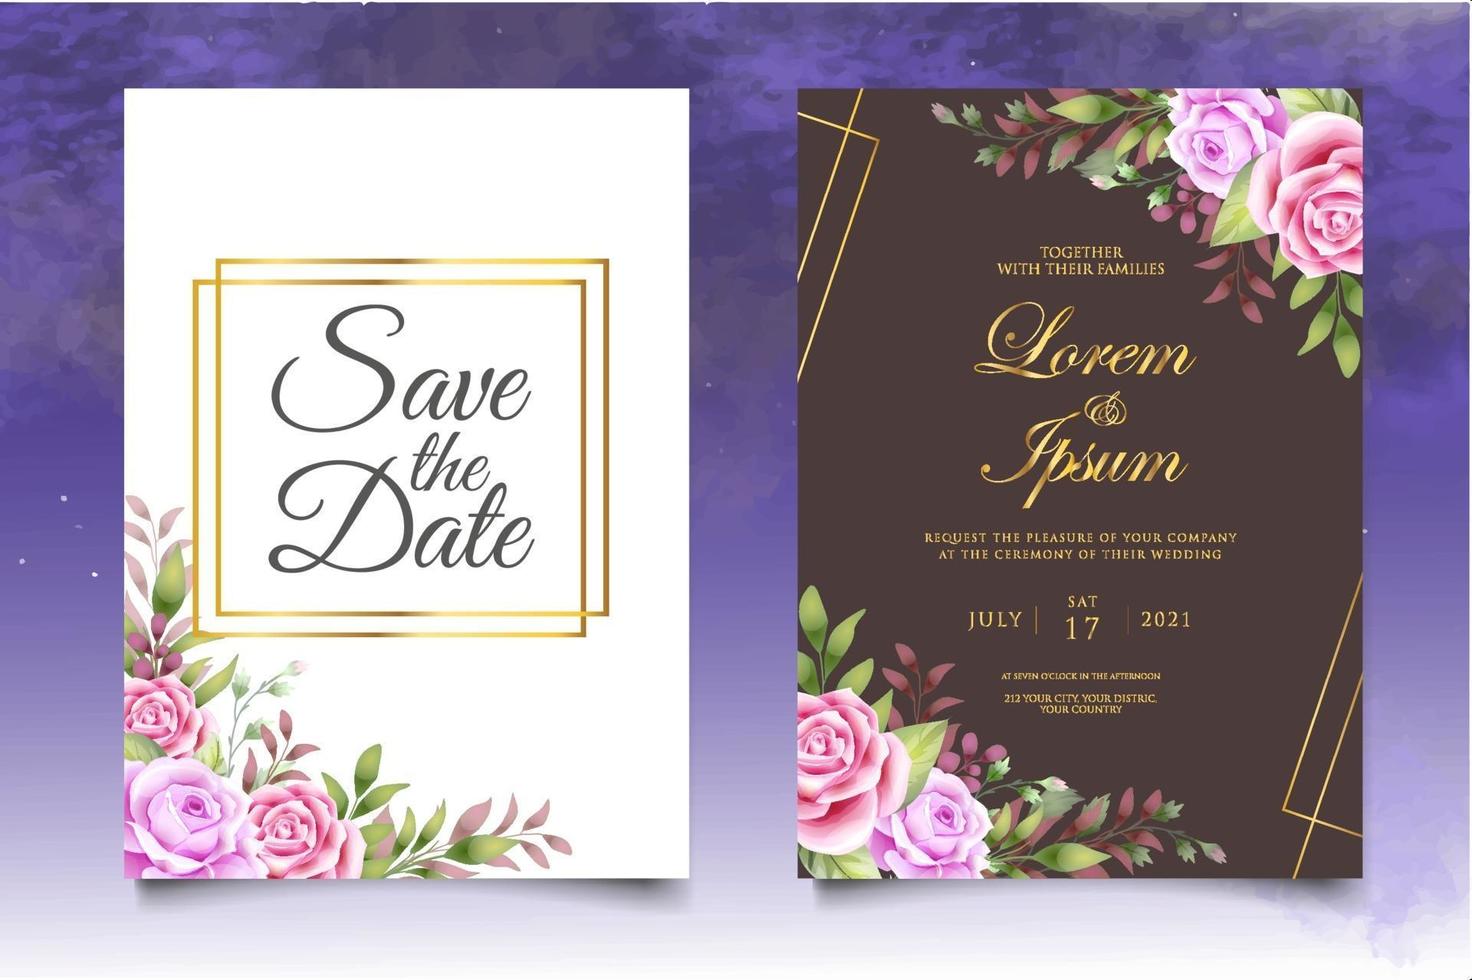 Beautiful Hand Drawing Floral Wedding Invitation Template vector